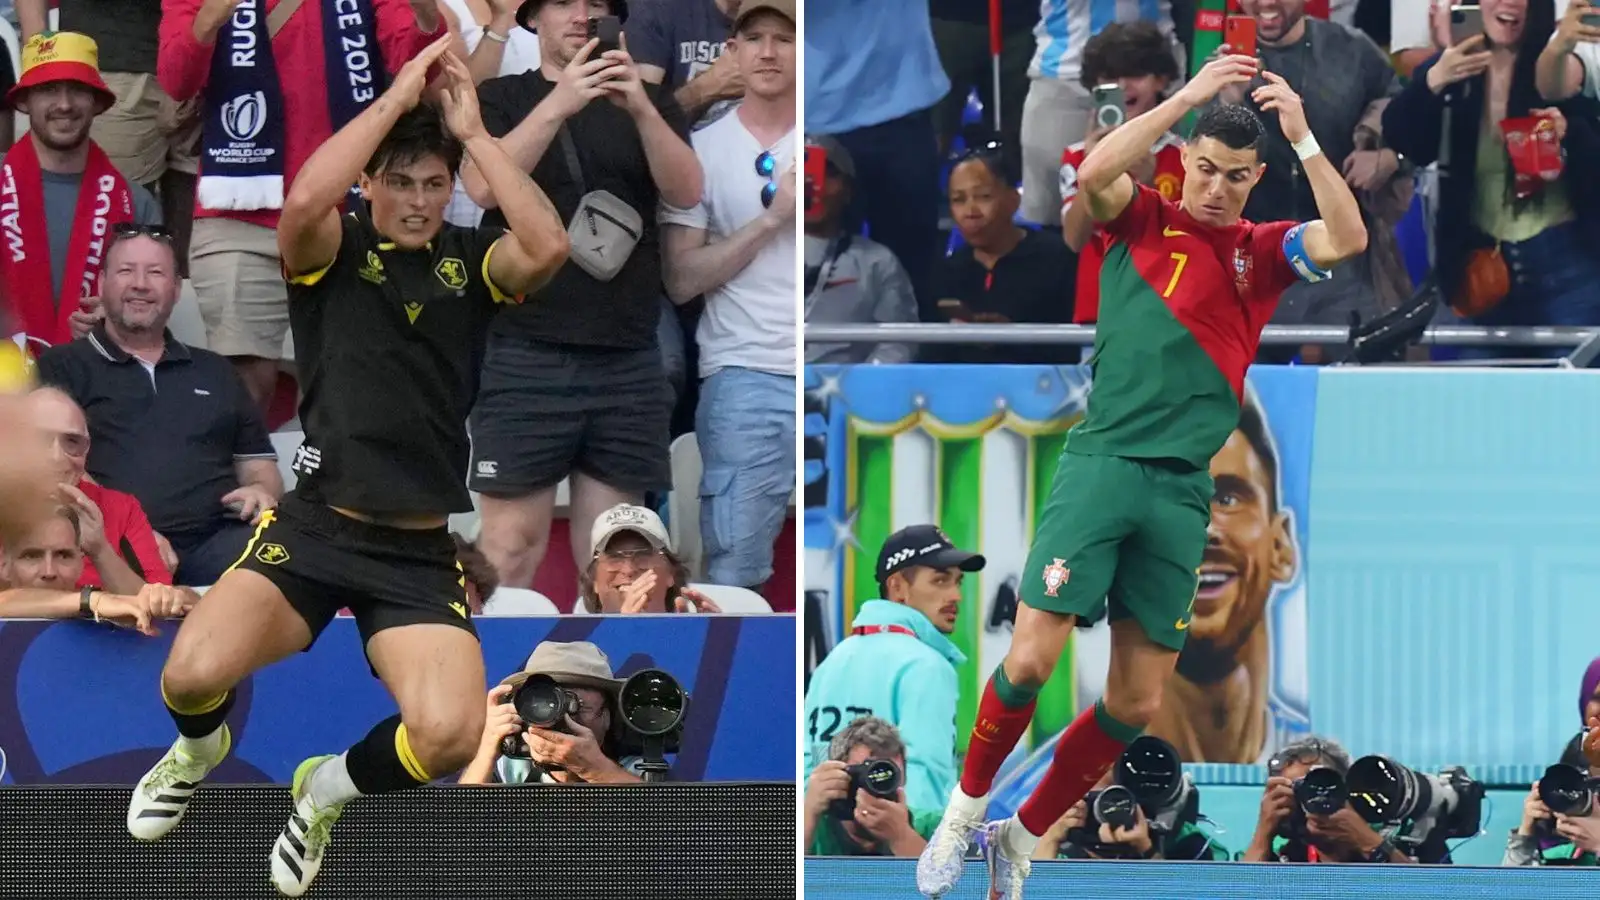 Wales winger Louis Rees-Zammit and Portugal football star Critsiano Ronaldo. - Rugby World Cup